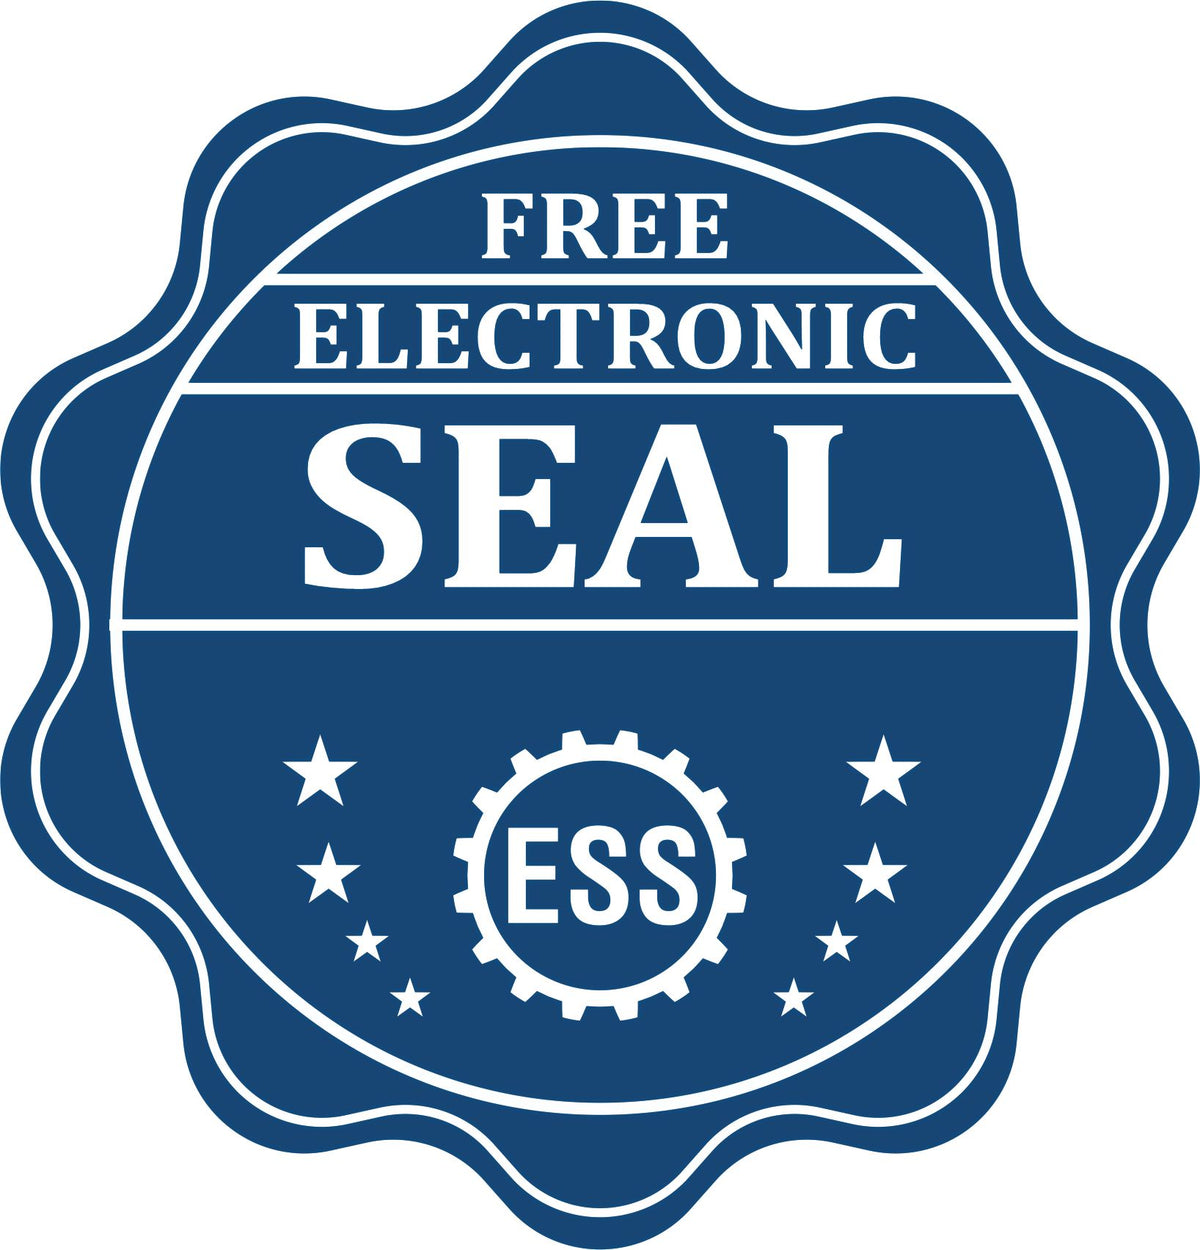 A badge showing a free electronic seal for the Premium MaxLight Pre-Inked Minnesota Engineering Stamp with stars and the ESS gear on the emblem.